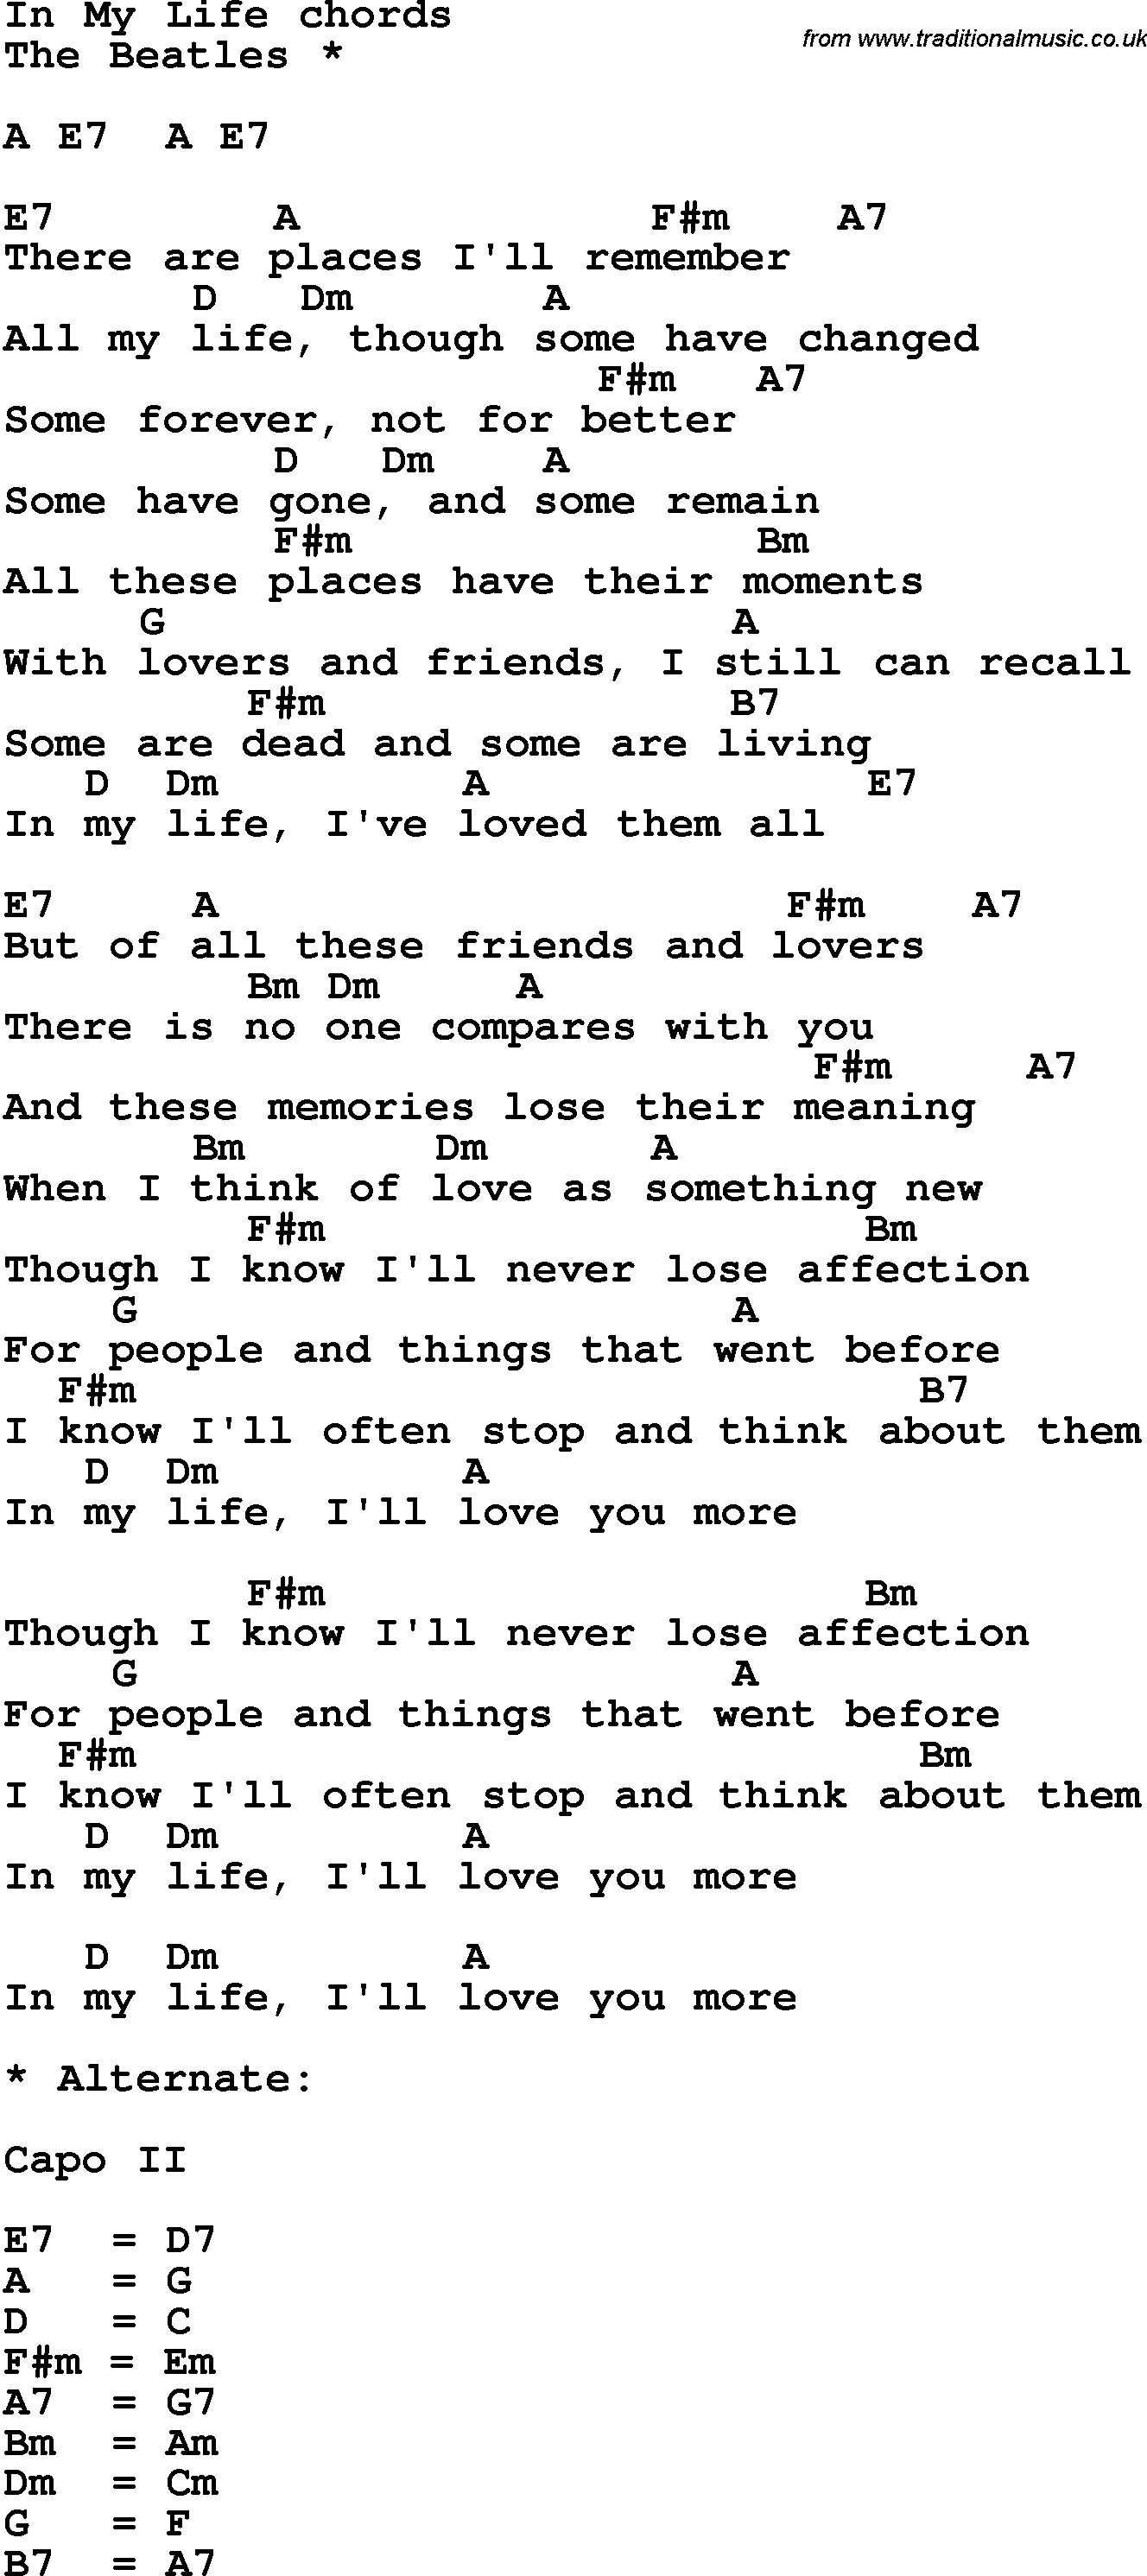 Song Lyrics with guitar chords for In My Life - John Lennon